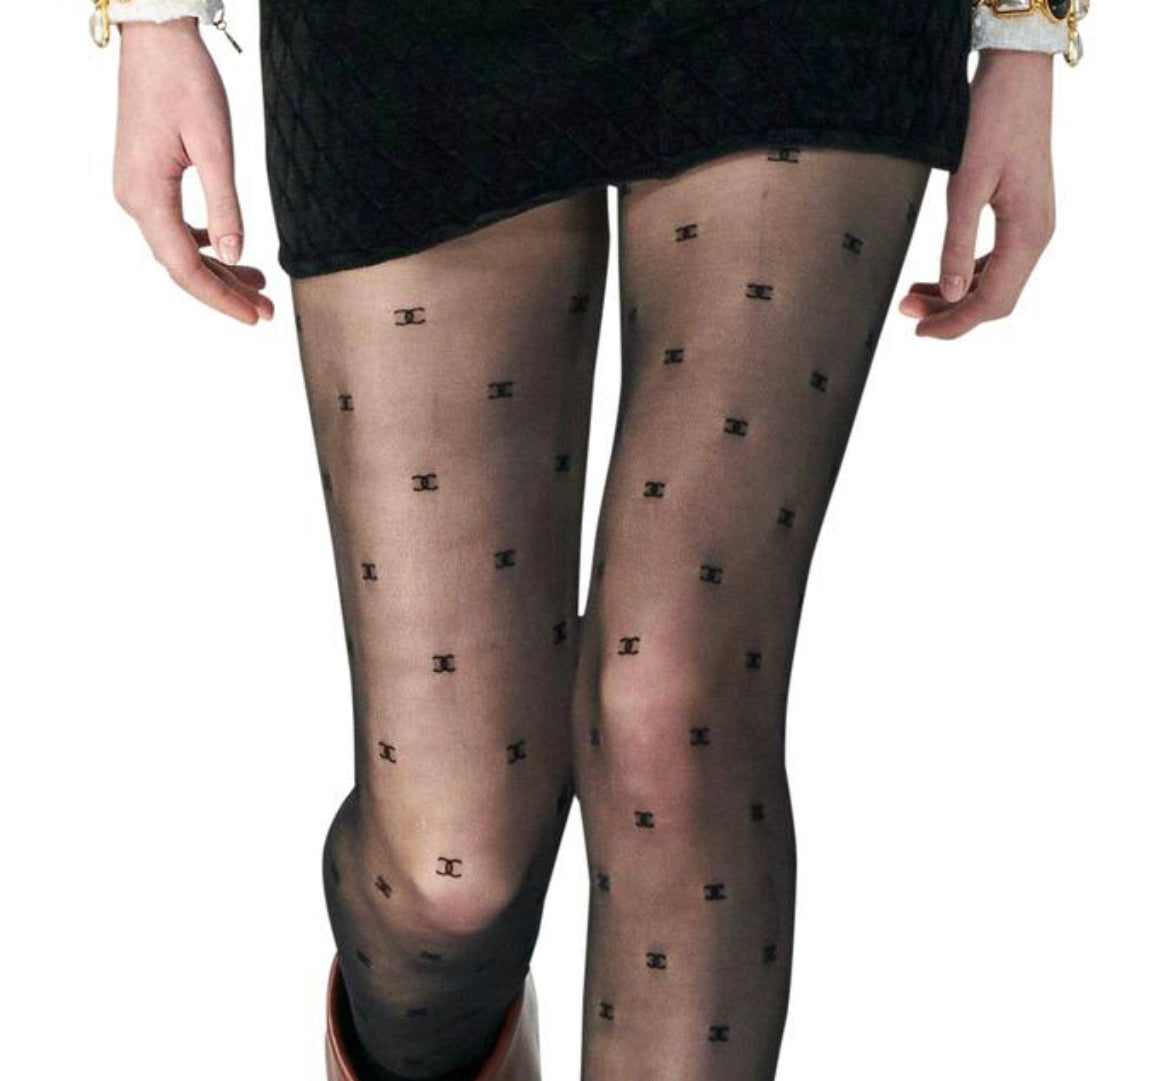 Matchy-Matchy Tights Might Just Be Spring's Most Controversial